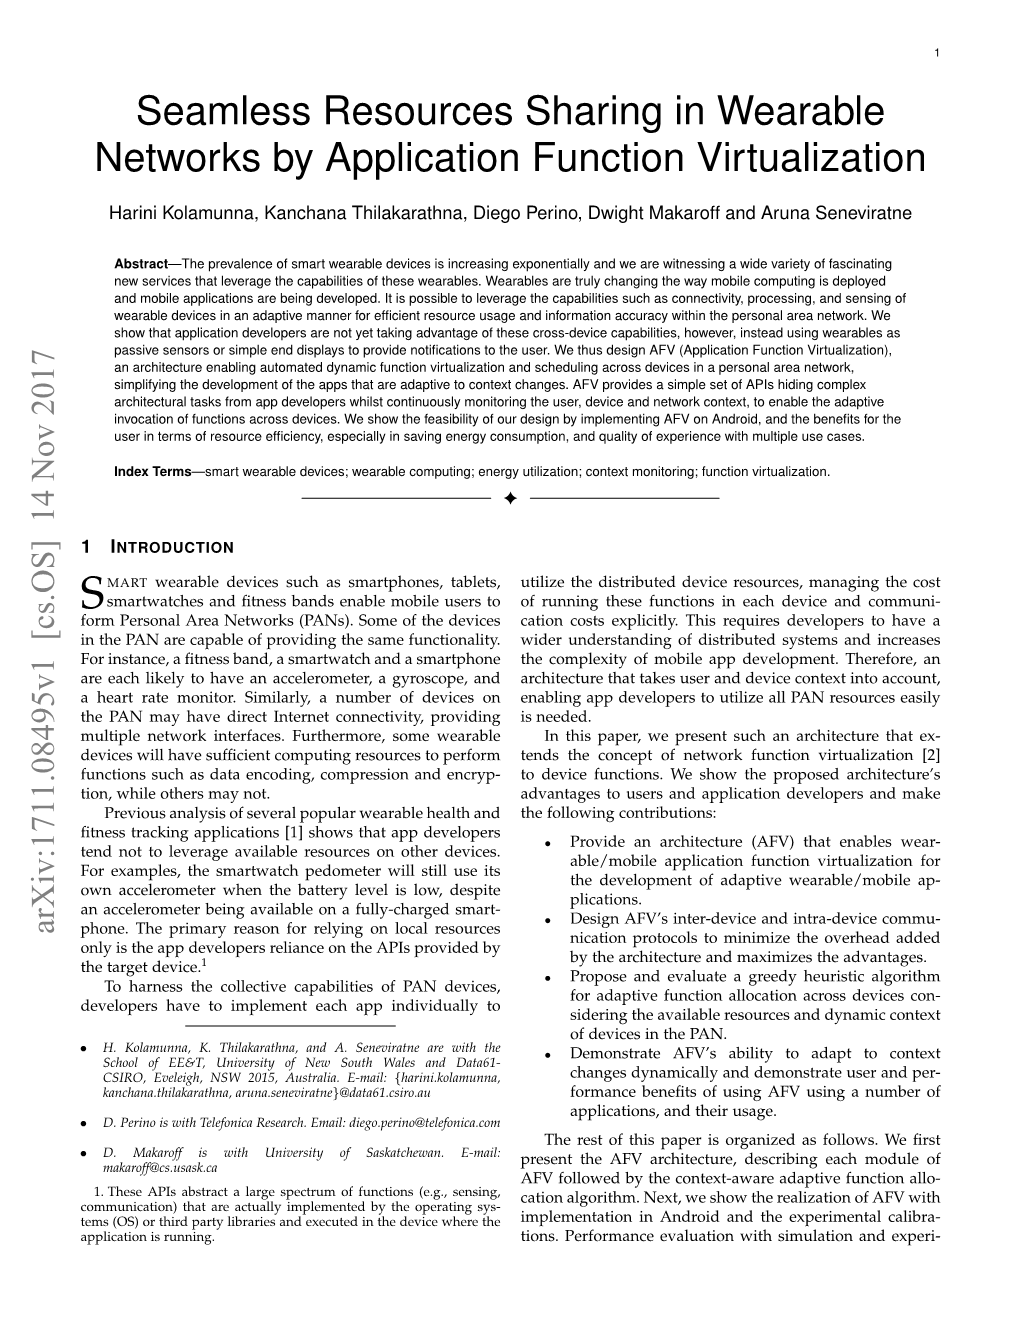 Seamless Resources Sharing in Wearable Networks by Application Function Virtualization